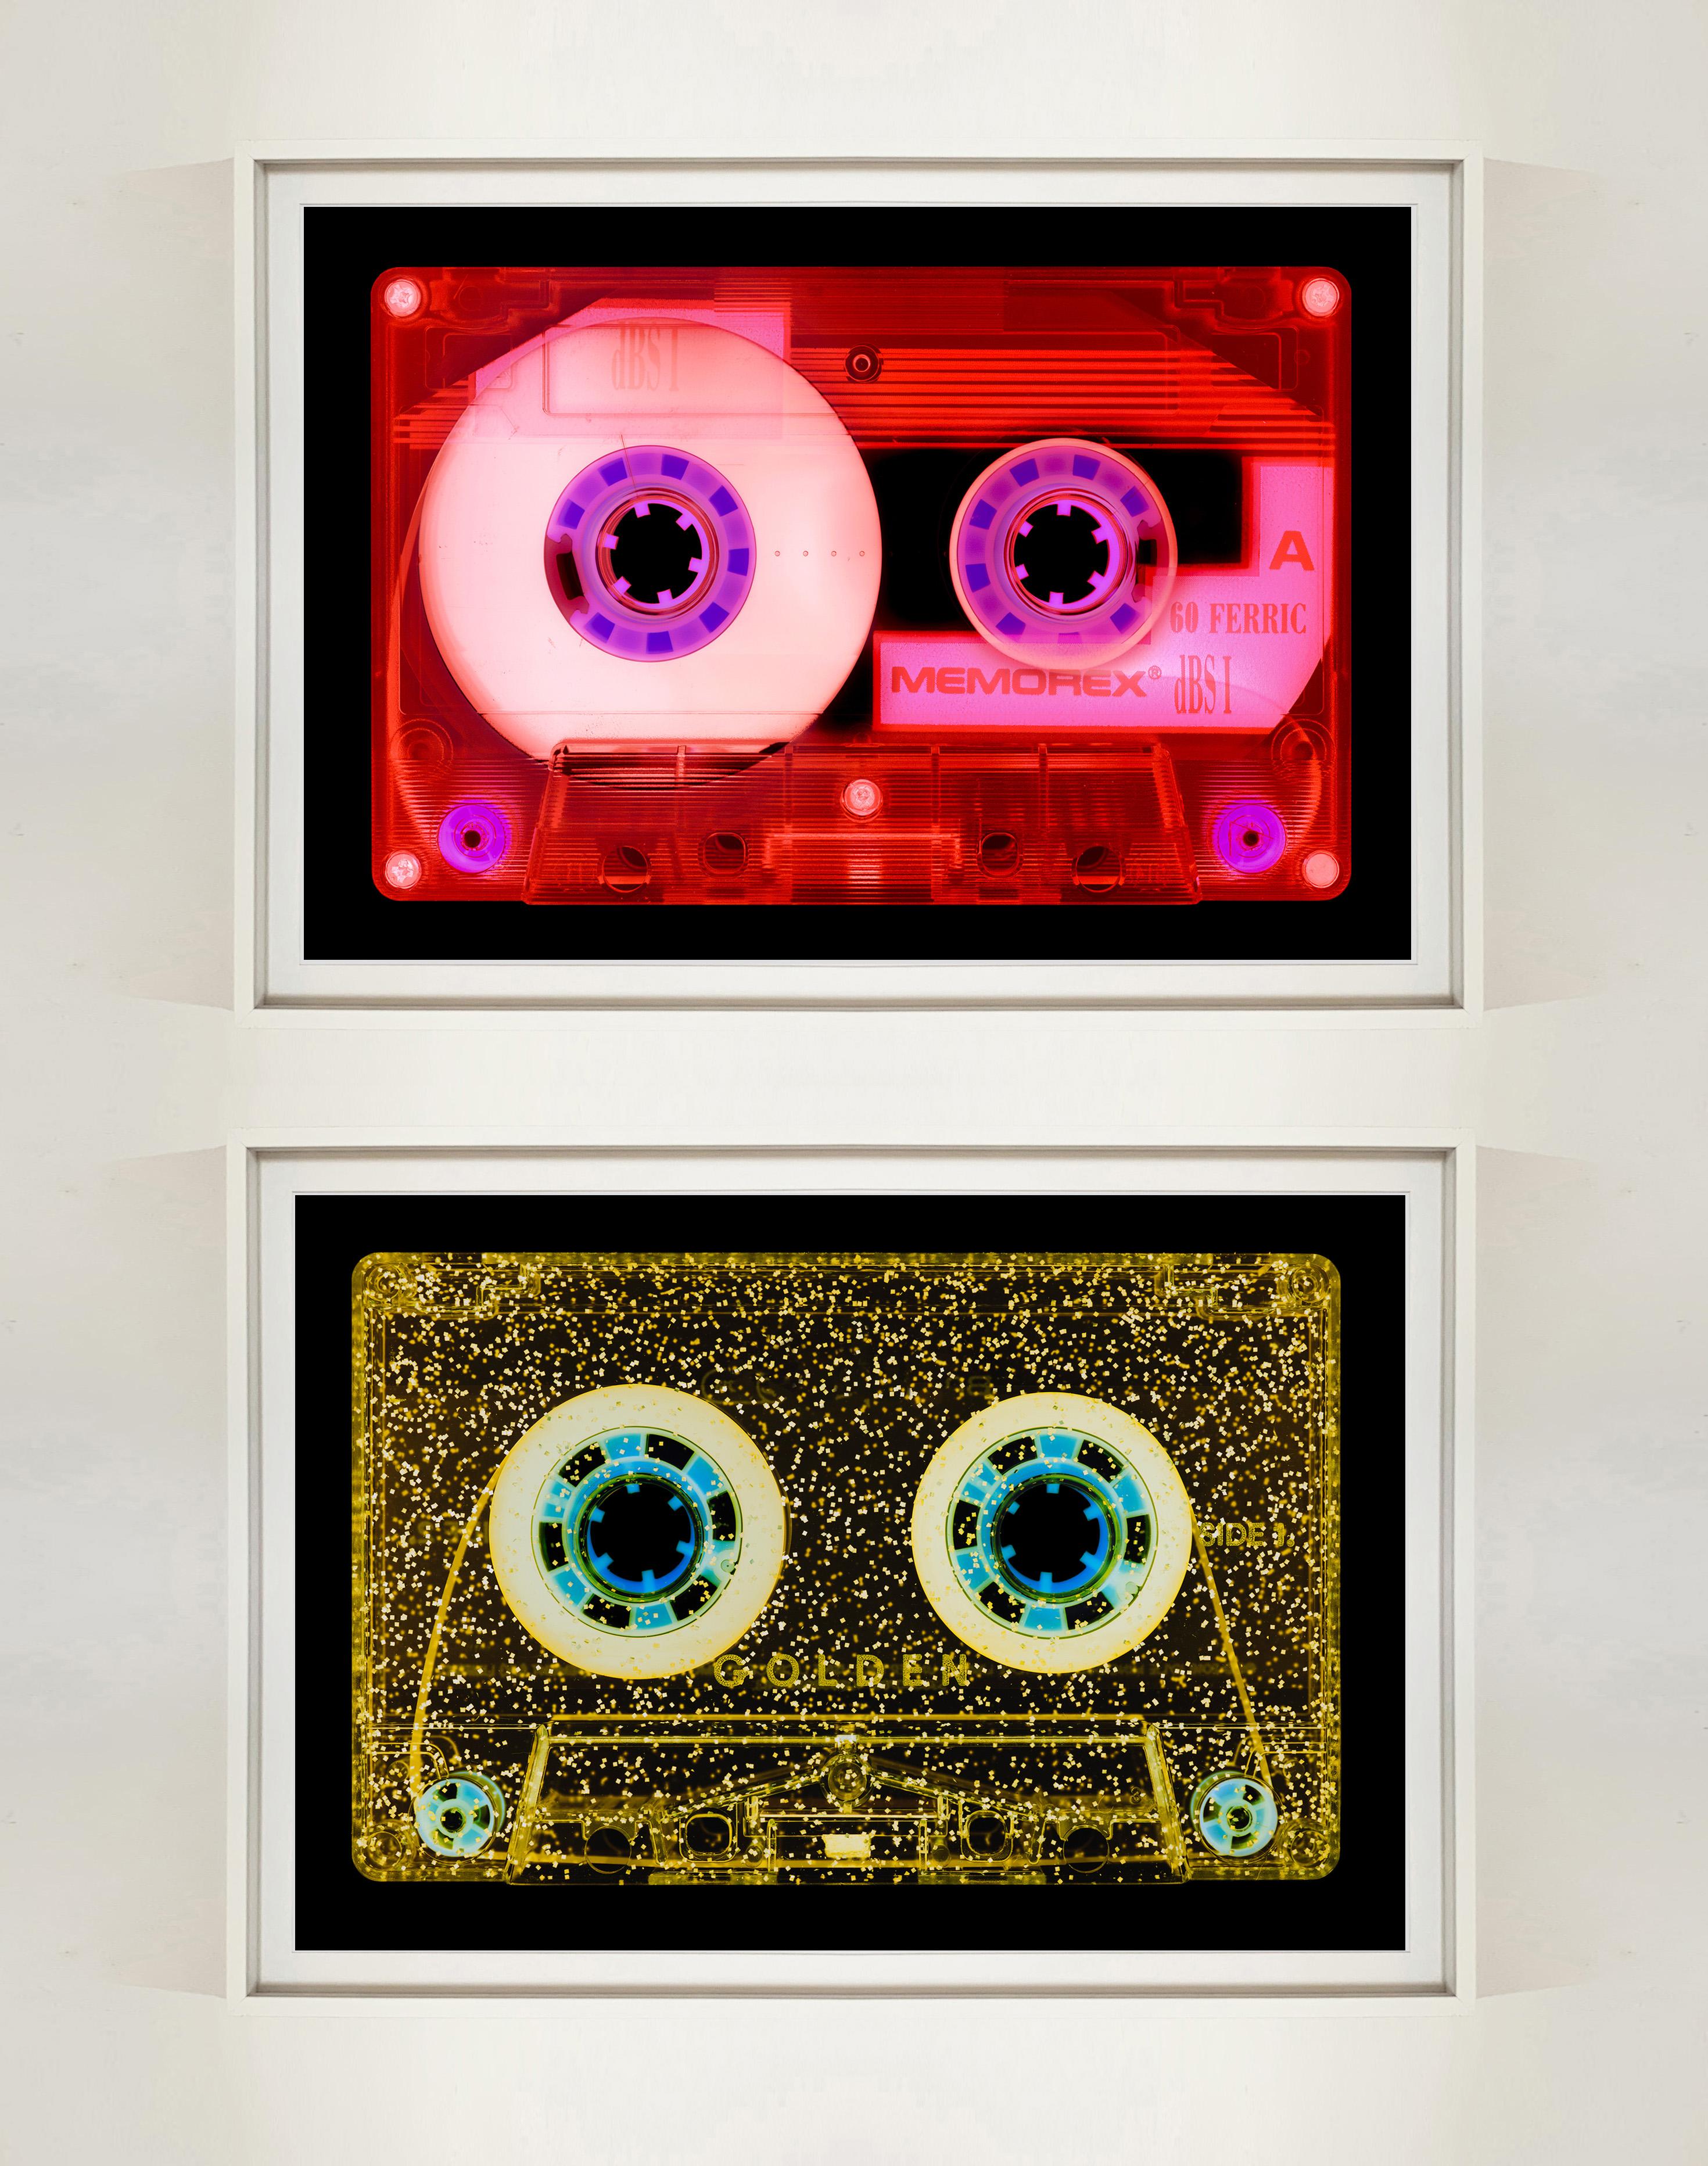 Tape Collection, Ferric 60 (Tinted Red) - Pop Art Color Photography - Contemporary Print by Heidler & Heeps